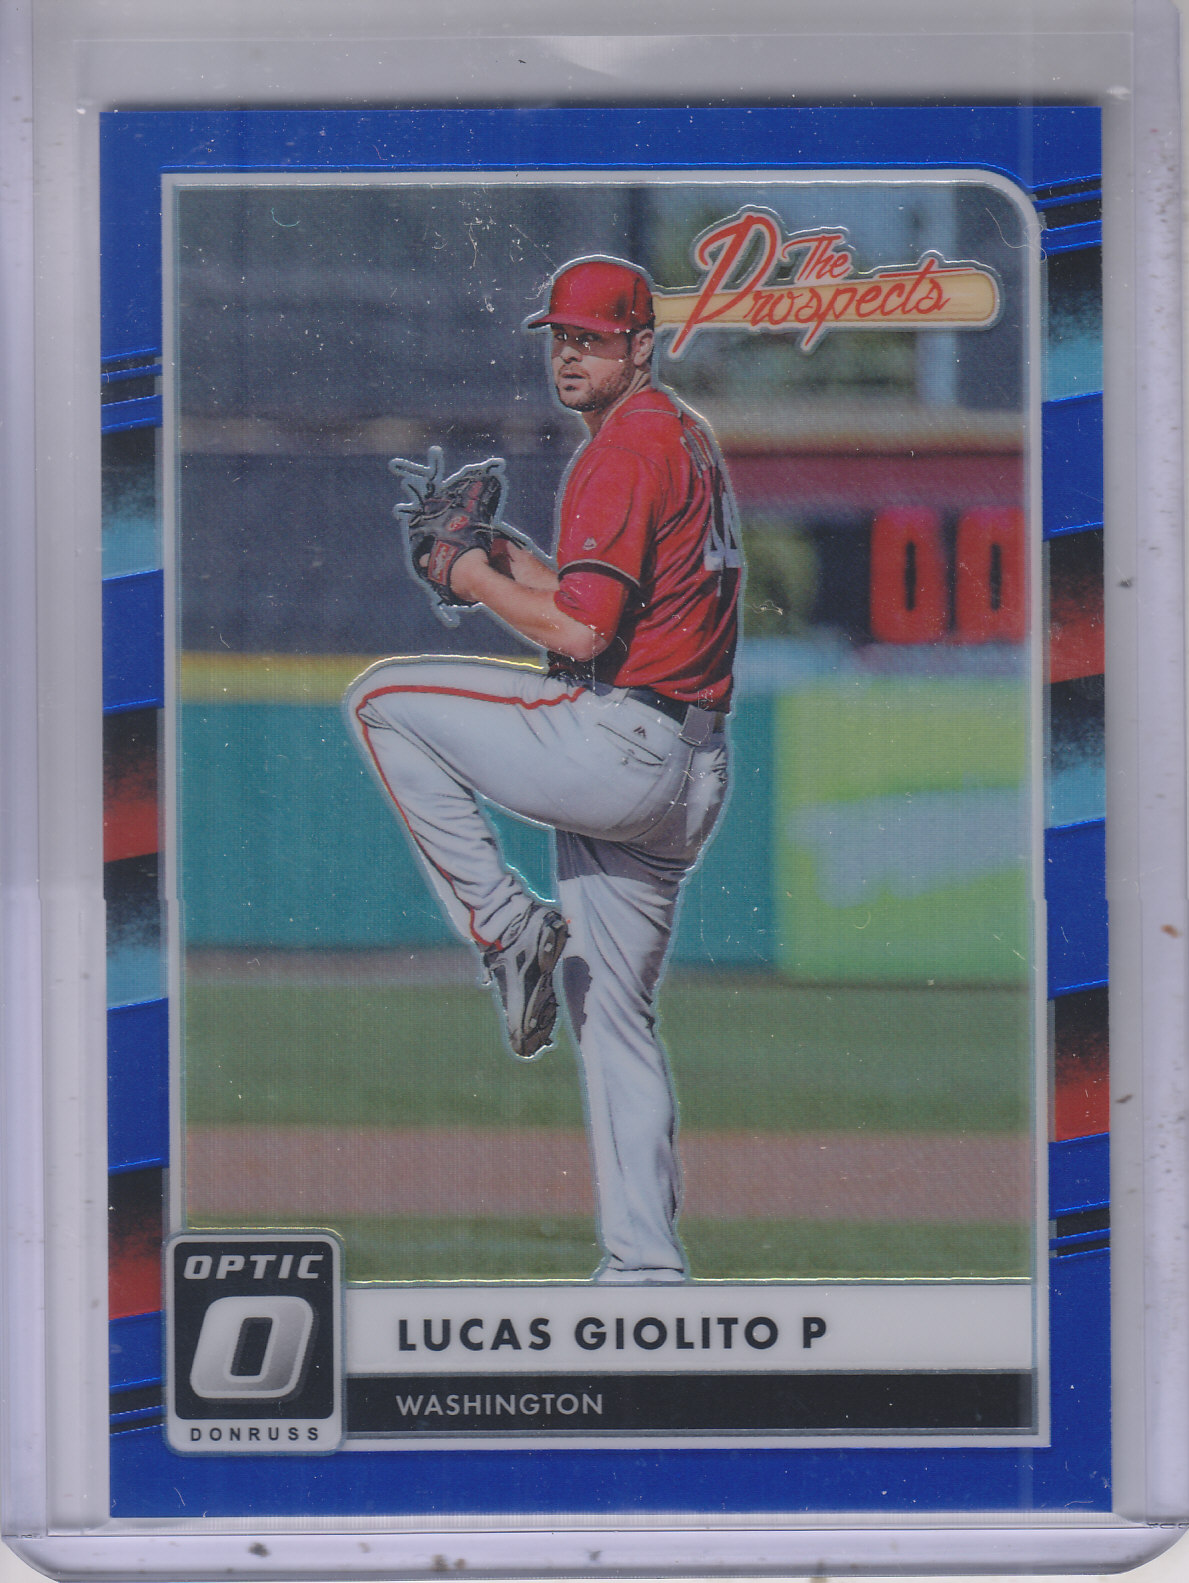 2016 Donruss Optic The Prospects #1 Lucas Giolito